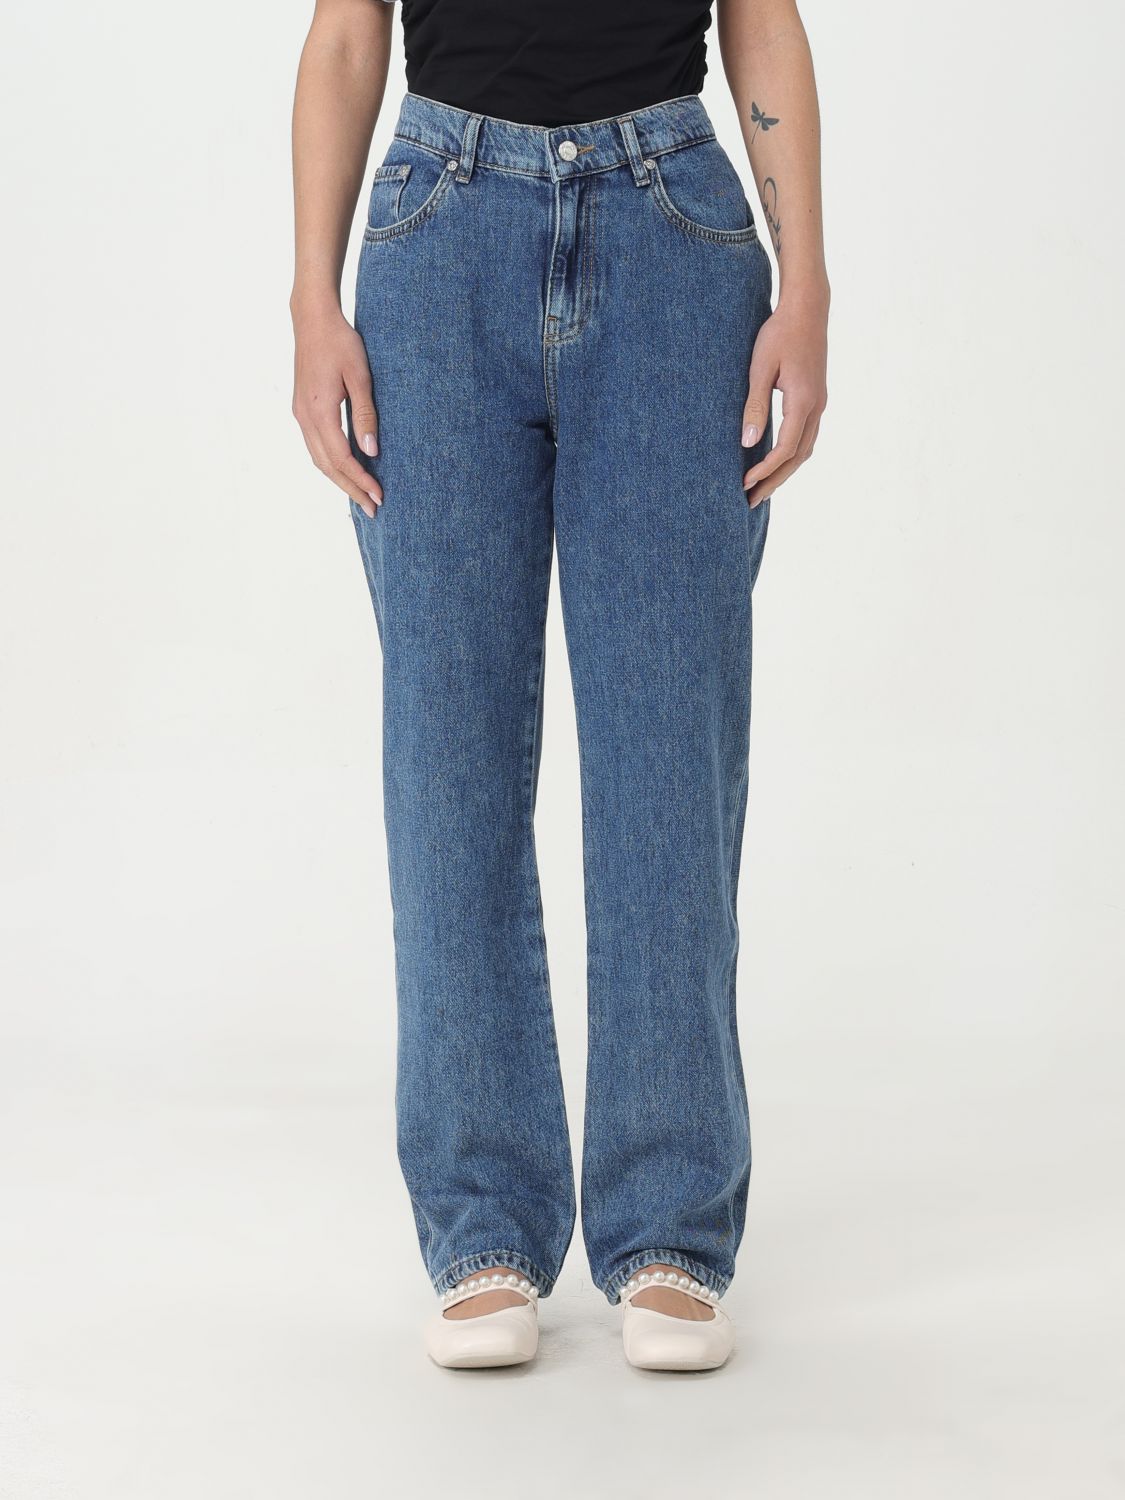 Moschino Jeans Jeans MOSCHINO JEANS Woman colour Denim